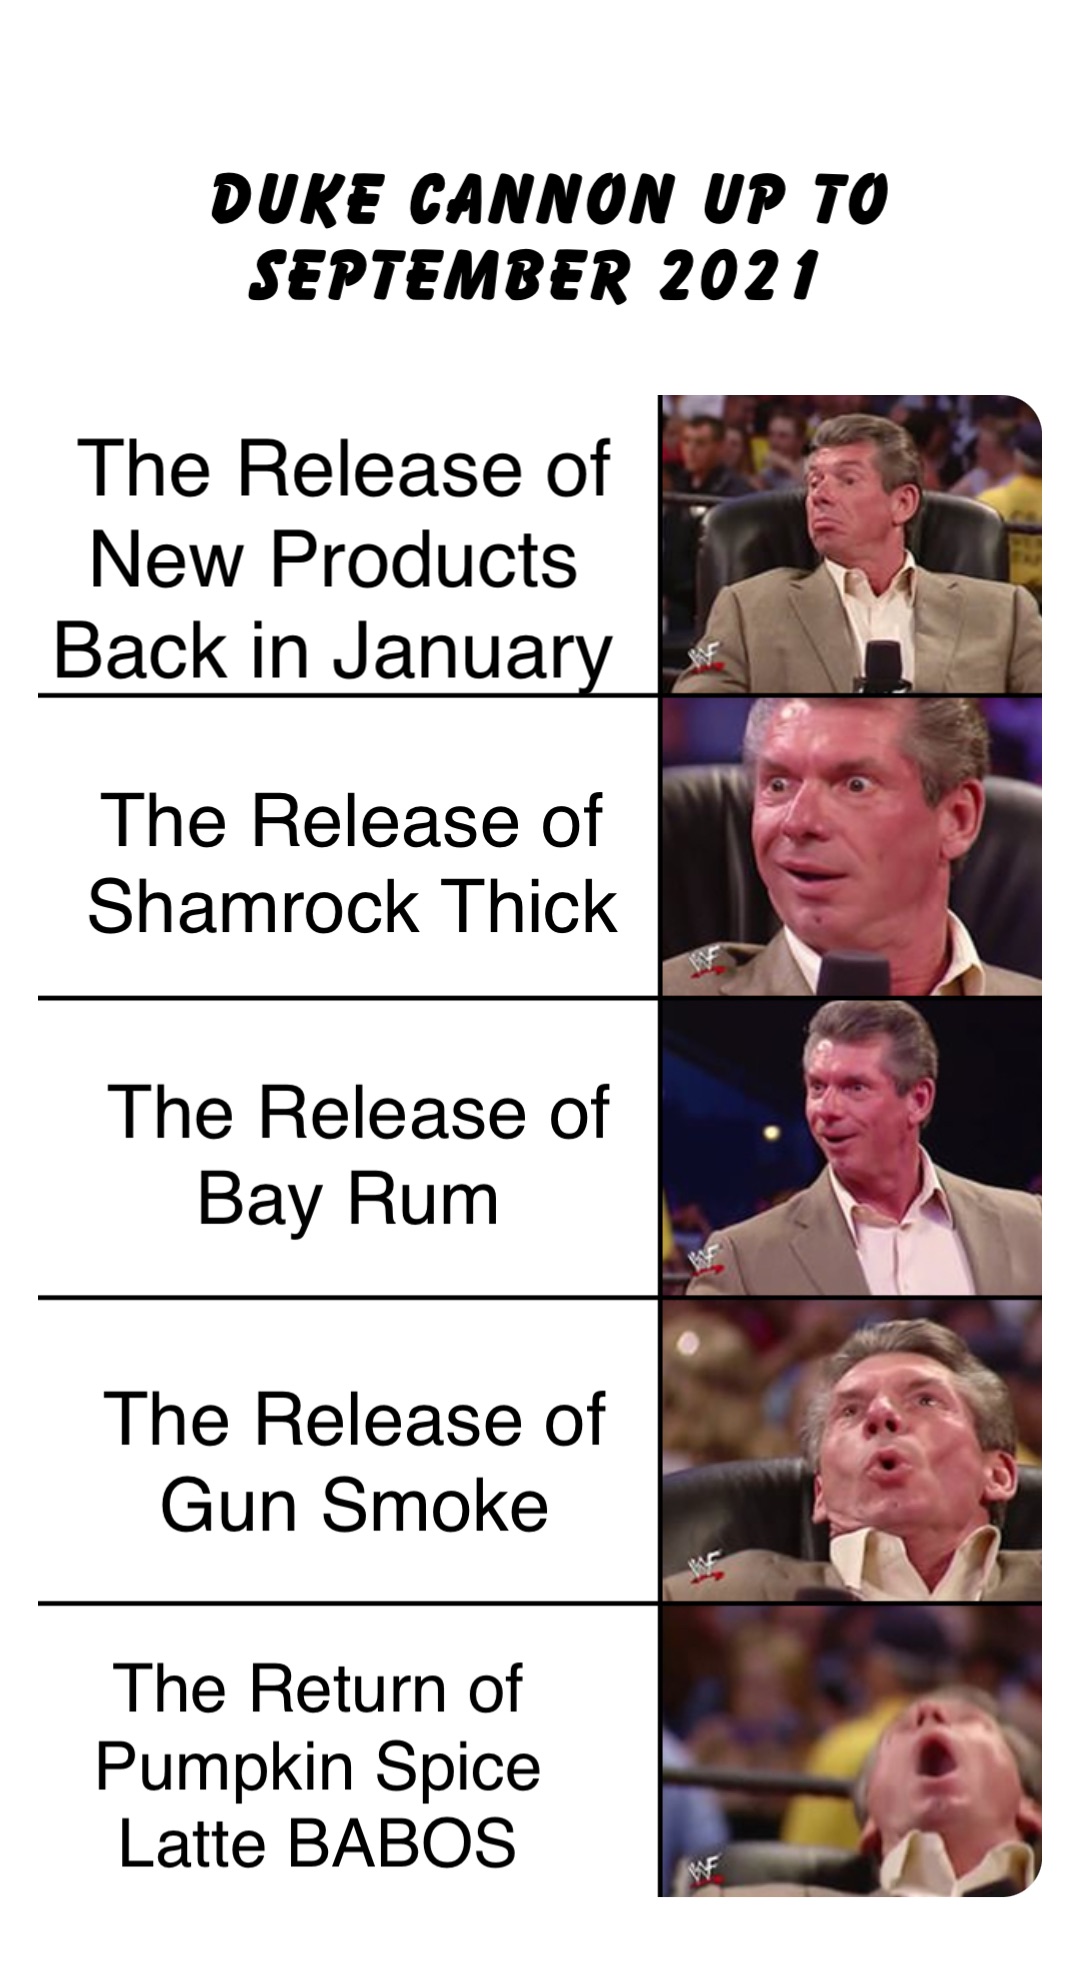 Duke Cannon Up to 
September 2021 The Release of 
New Products
Back in January The Release of
Shamrock Thick The Release of 
Bay Rum The Release of
Gun Smoke The Return of
Pumpkin Spice
Latte BABOS